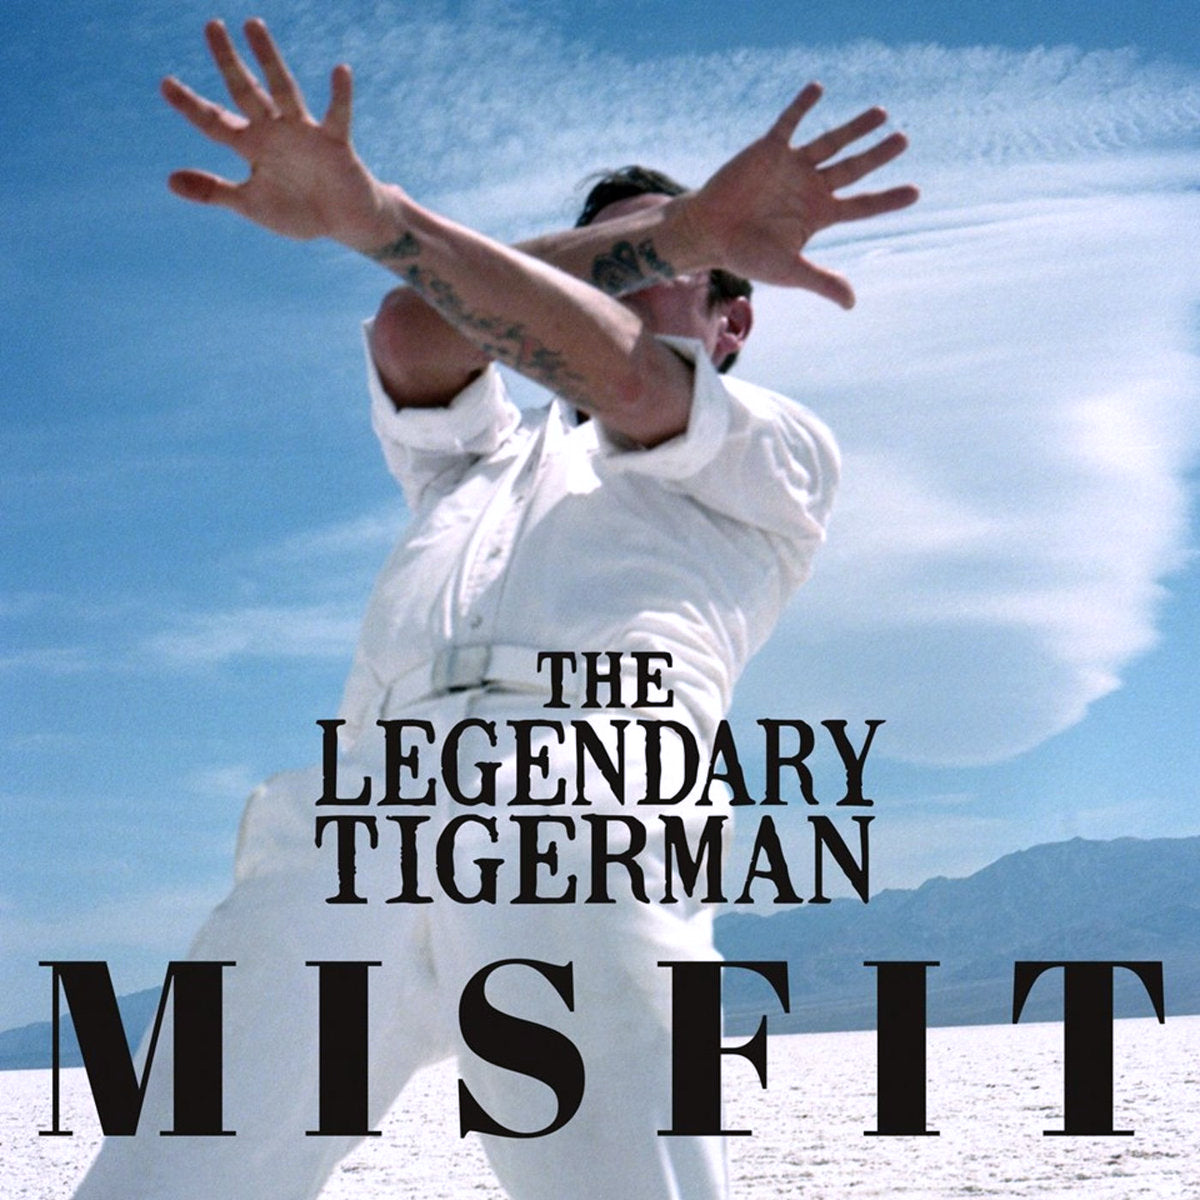 Legendary Tigerman- Misfit CD ~QUEENS OF THE STONE AGE!